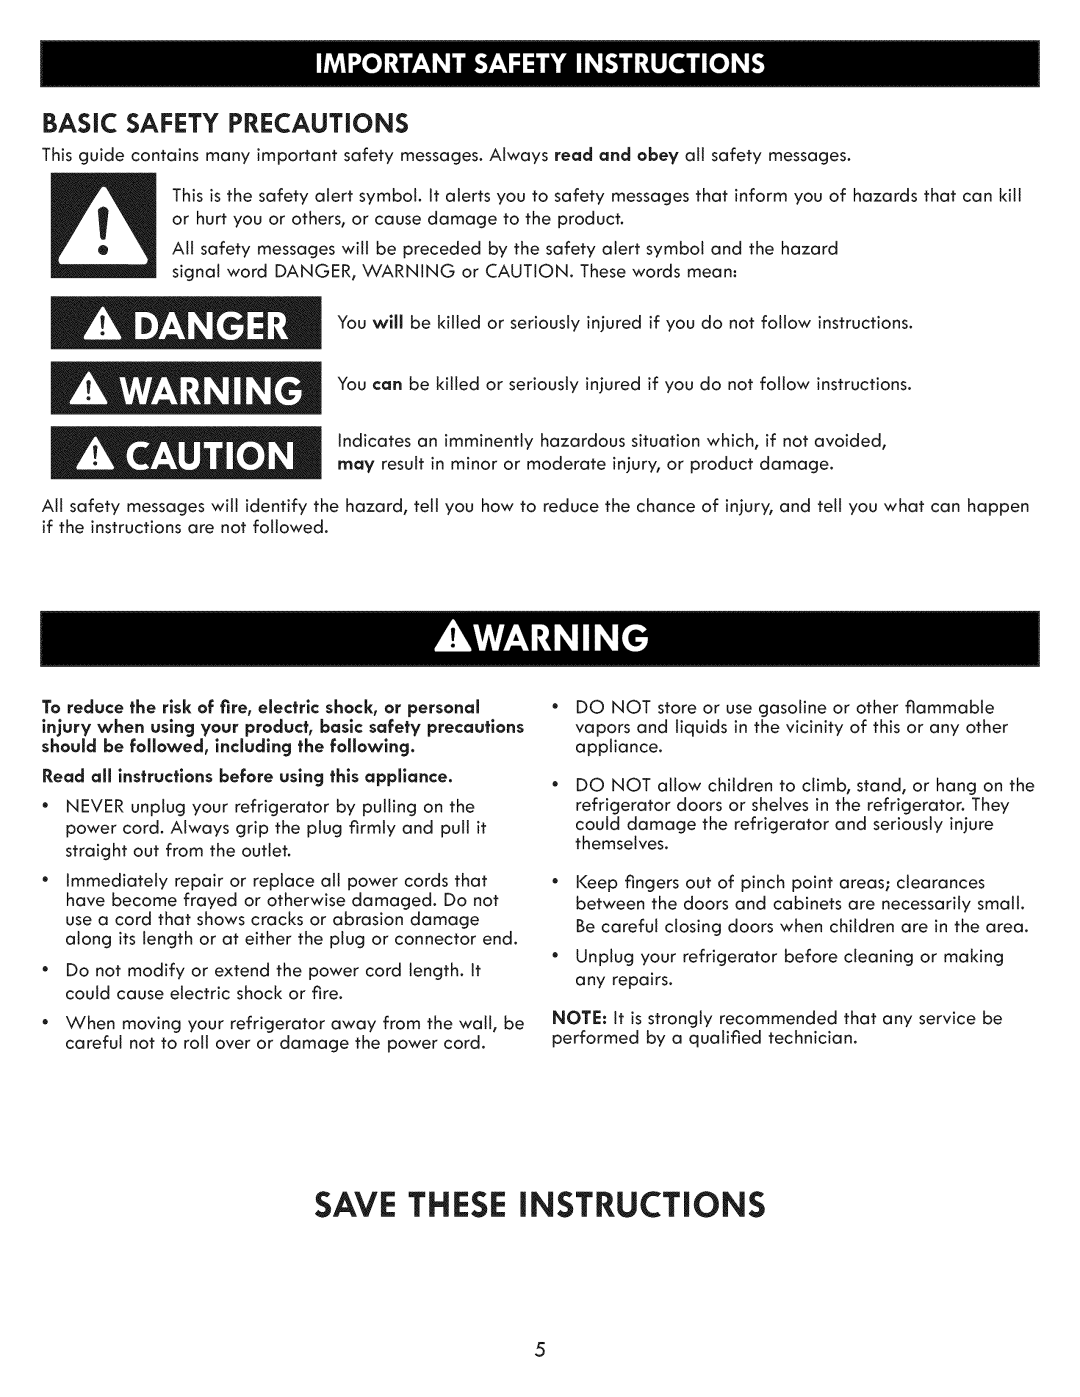 Kenmore 795.7202 manual Save These Instructions, Basic Safety Precautions 